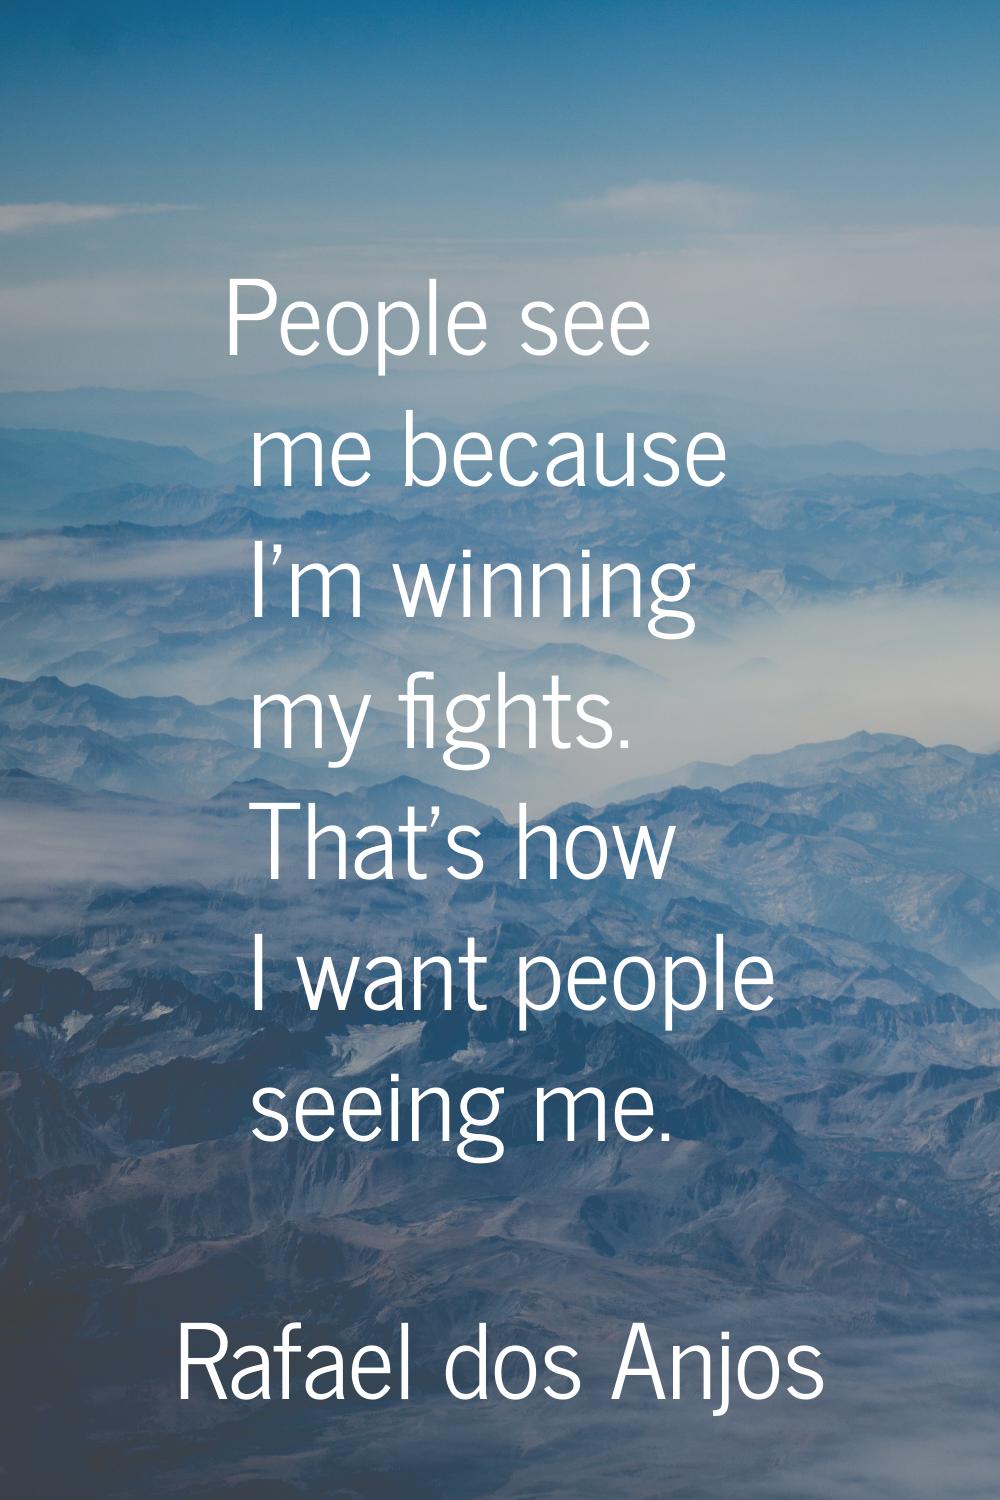 People see me because I'm winning my fights. That's how I want people seeing me.